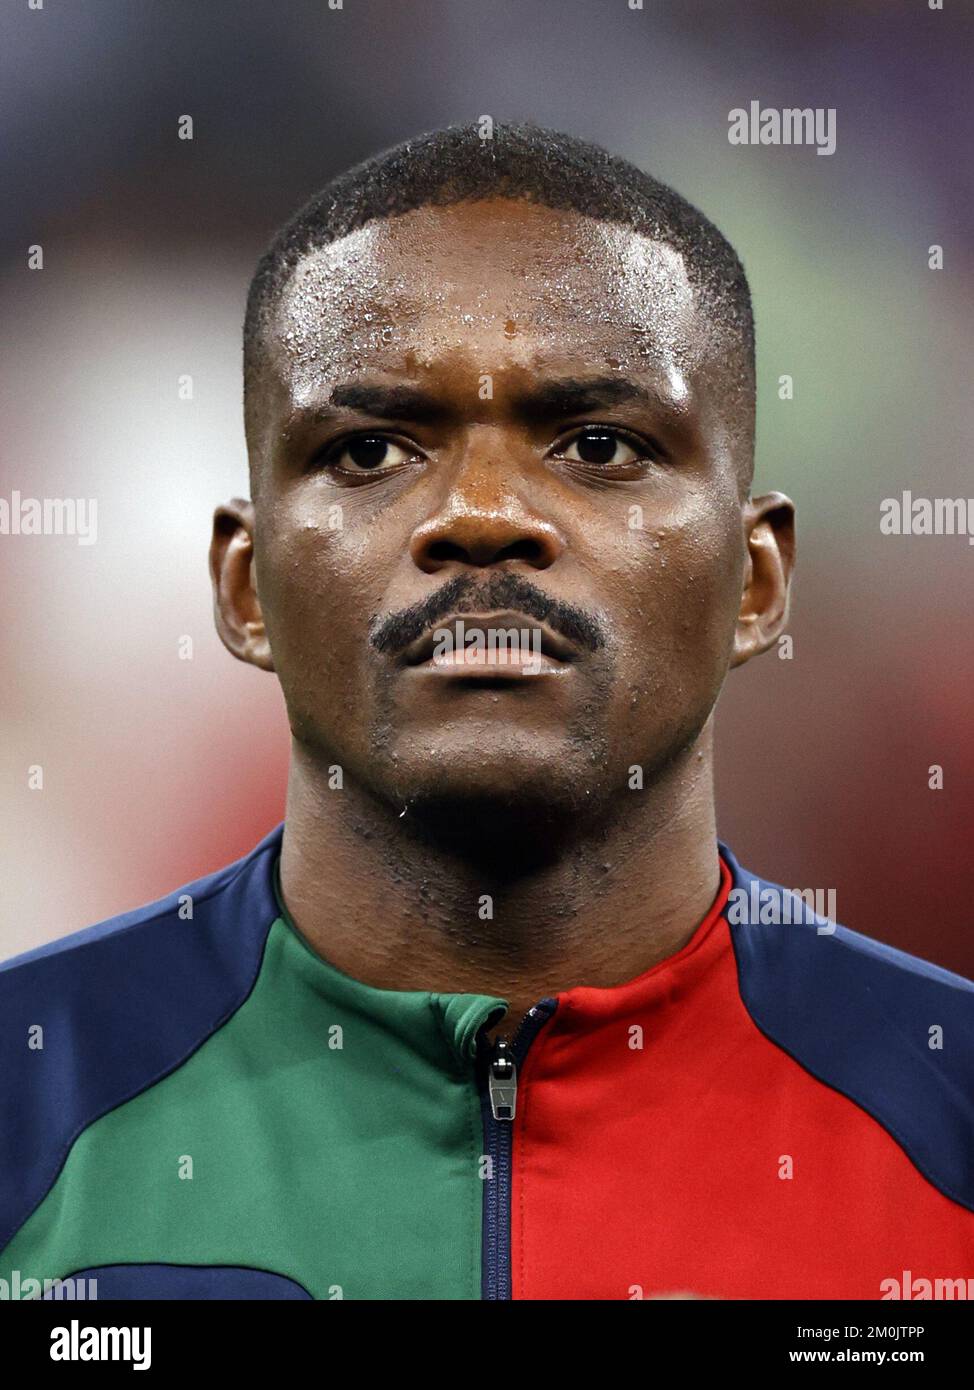 AL DAAYEN - William Carvalho of Portugal during the FIFA World Cup Qatar 2022 round of 16 match between Portugal and Switzerland at Lusail Stadium on December 6, 2022 in Al Daayen, Qatar. AP | Dutch Height | MAURICE OF STONE Stock Photo